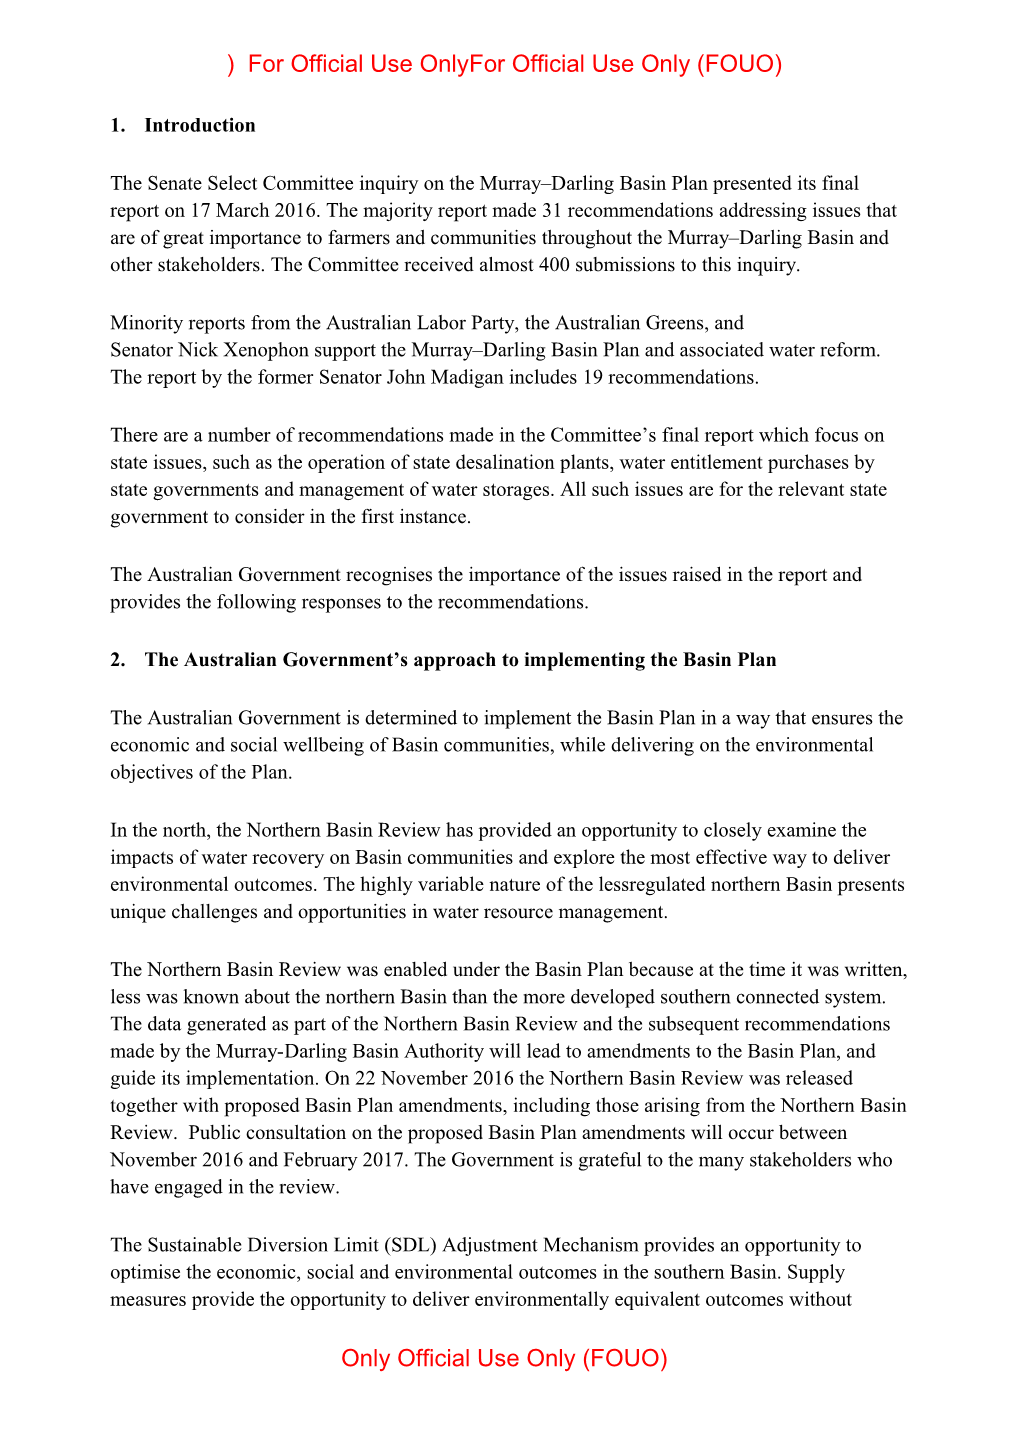 Australian Government Response to the Senate Select Committee on Themurray-Darling Basin